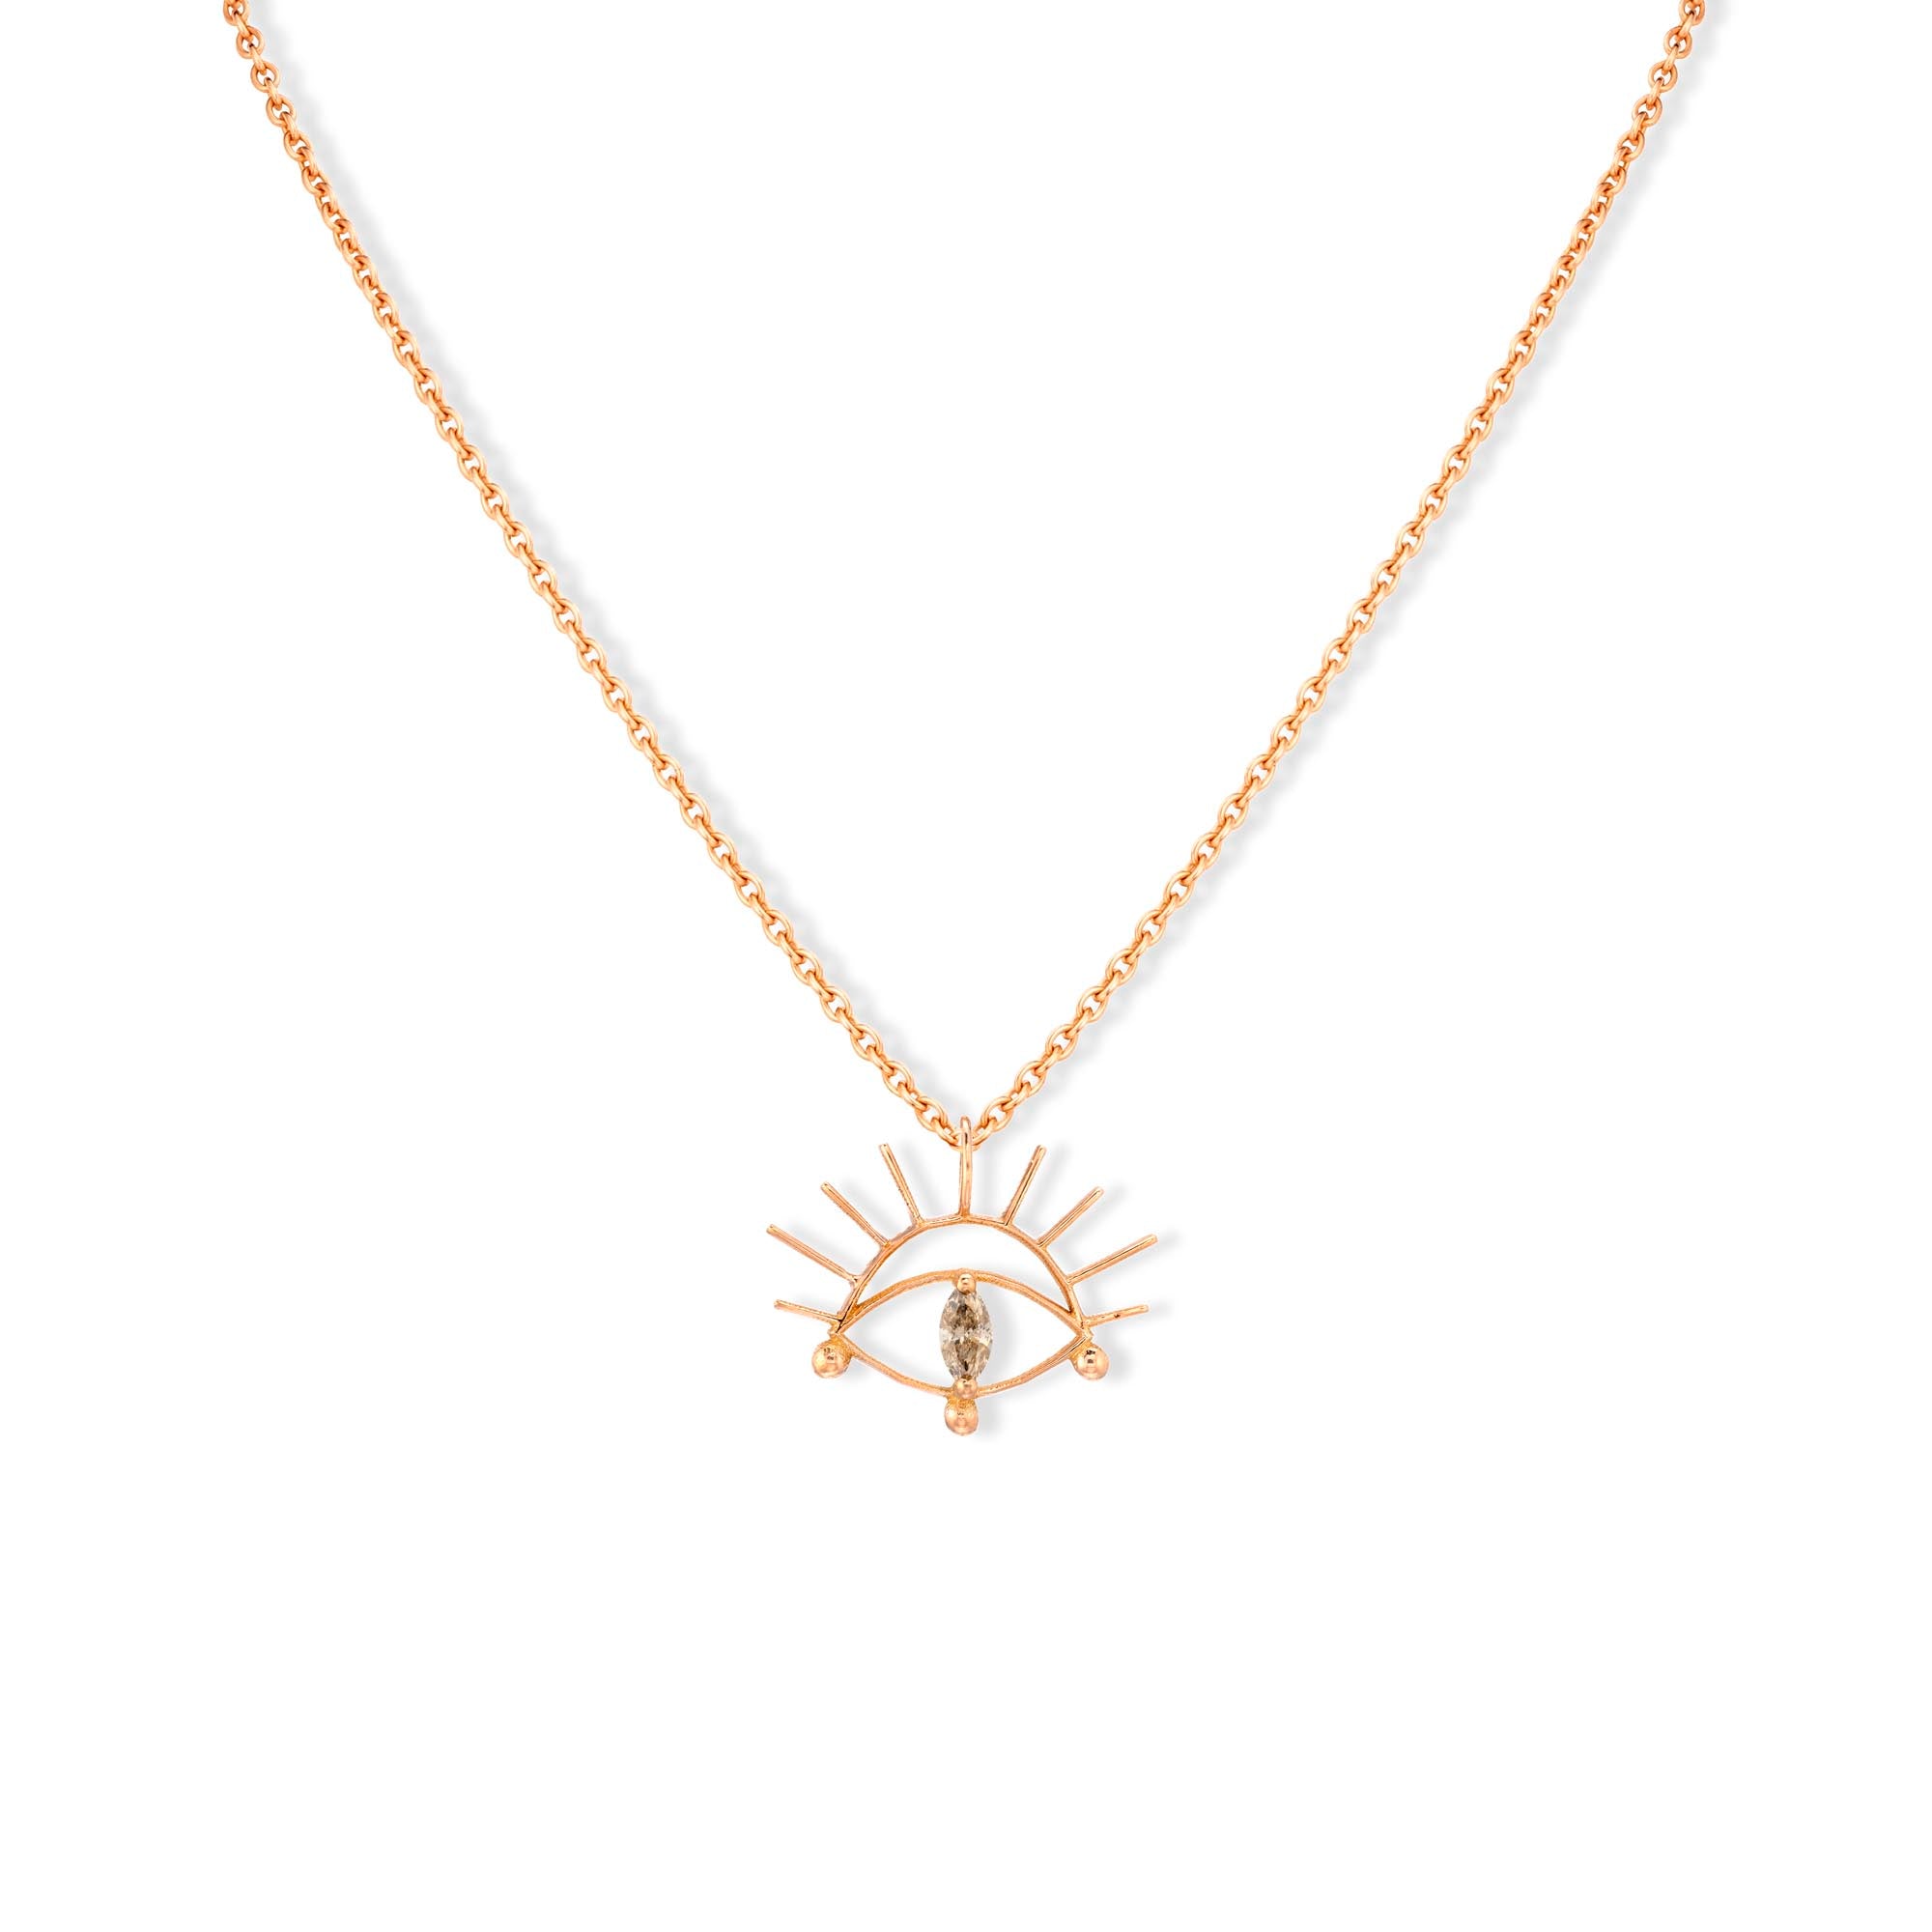 Girl Of The Sun Necklace N°2 